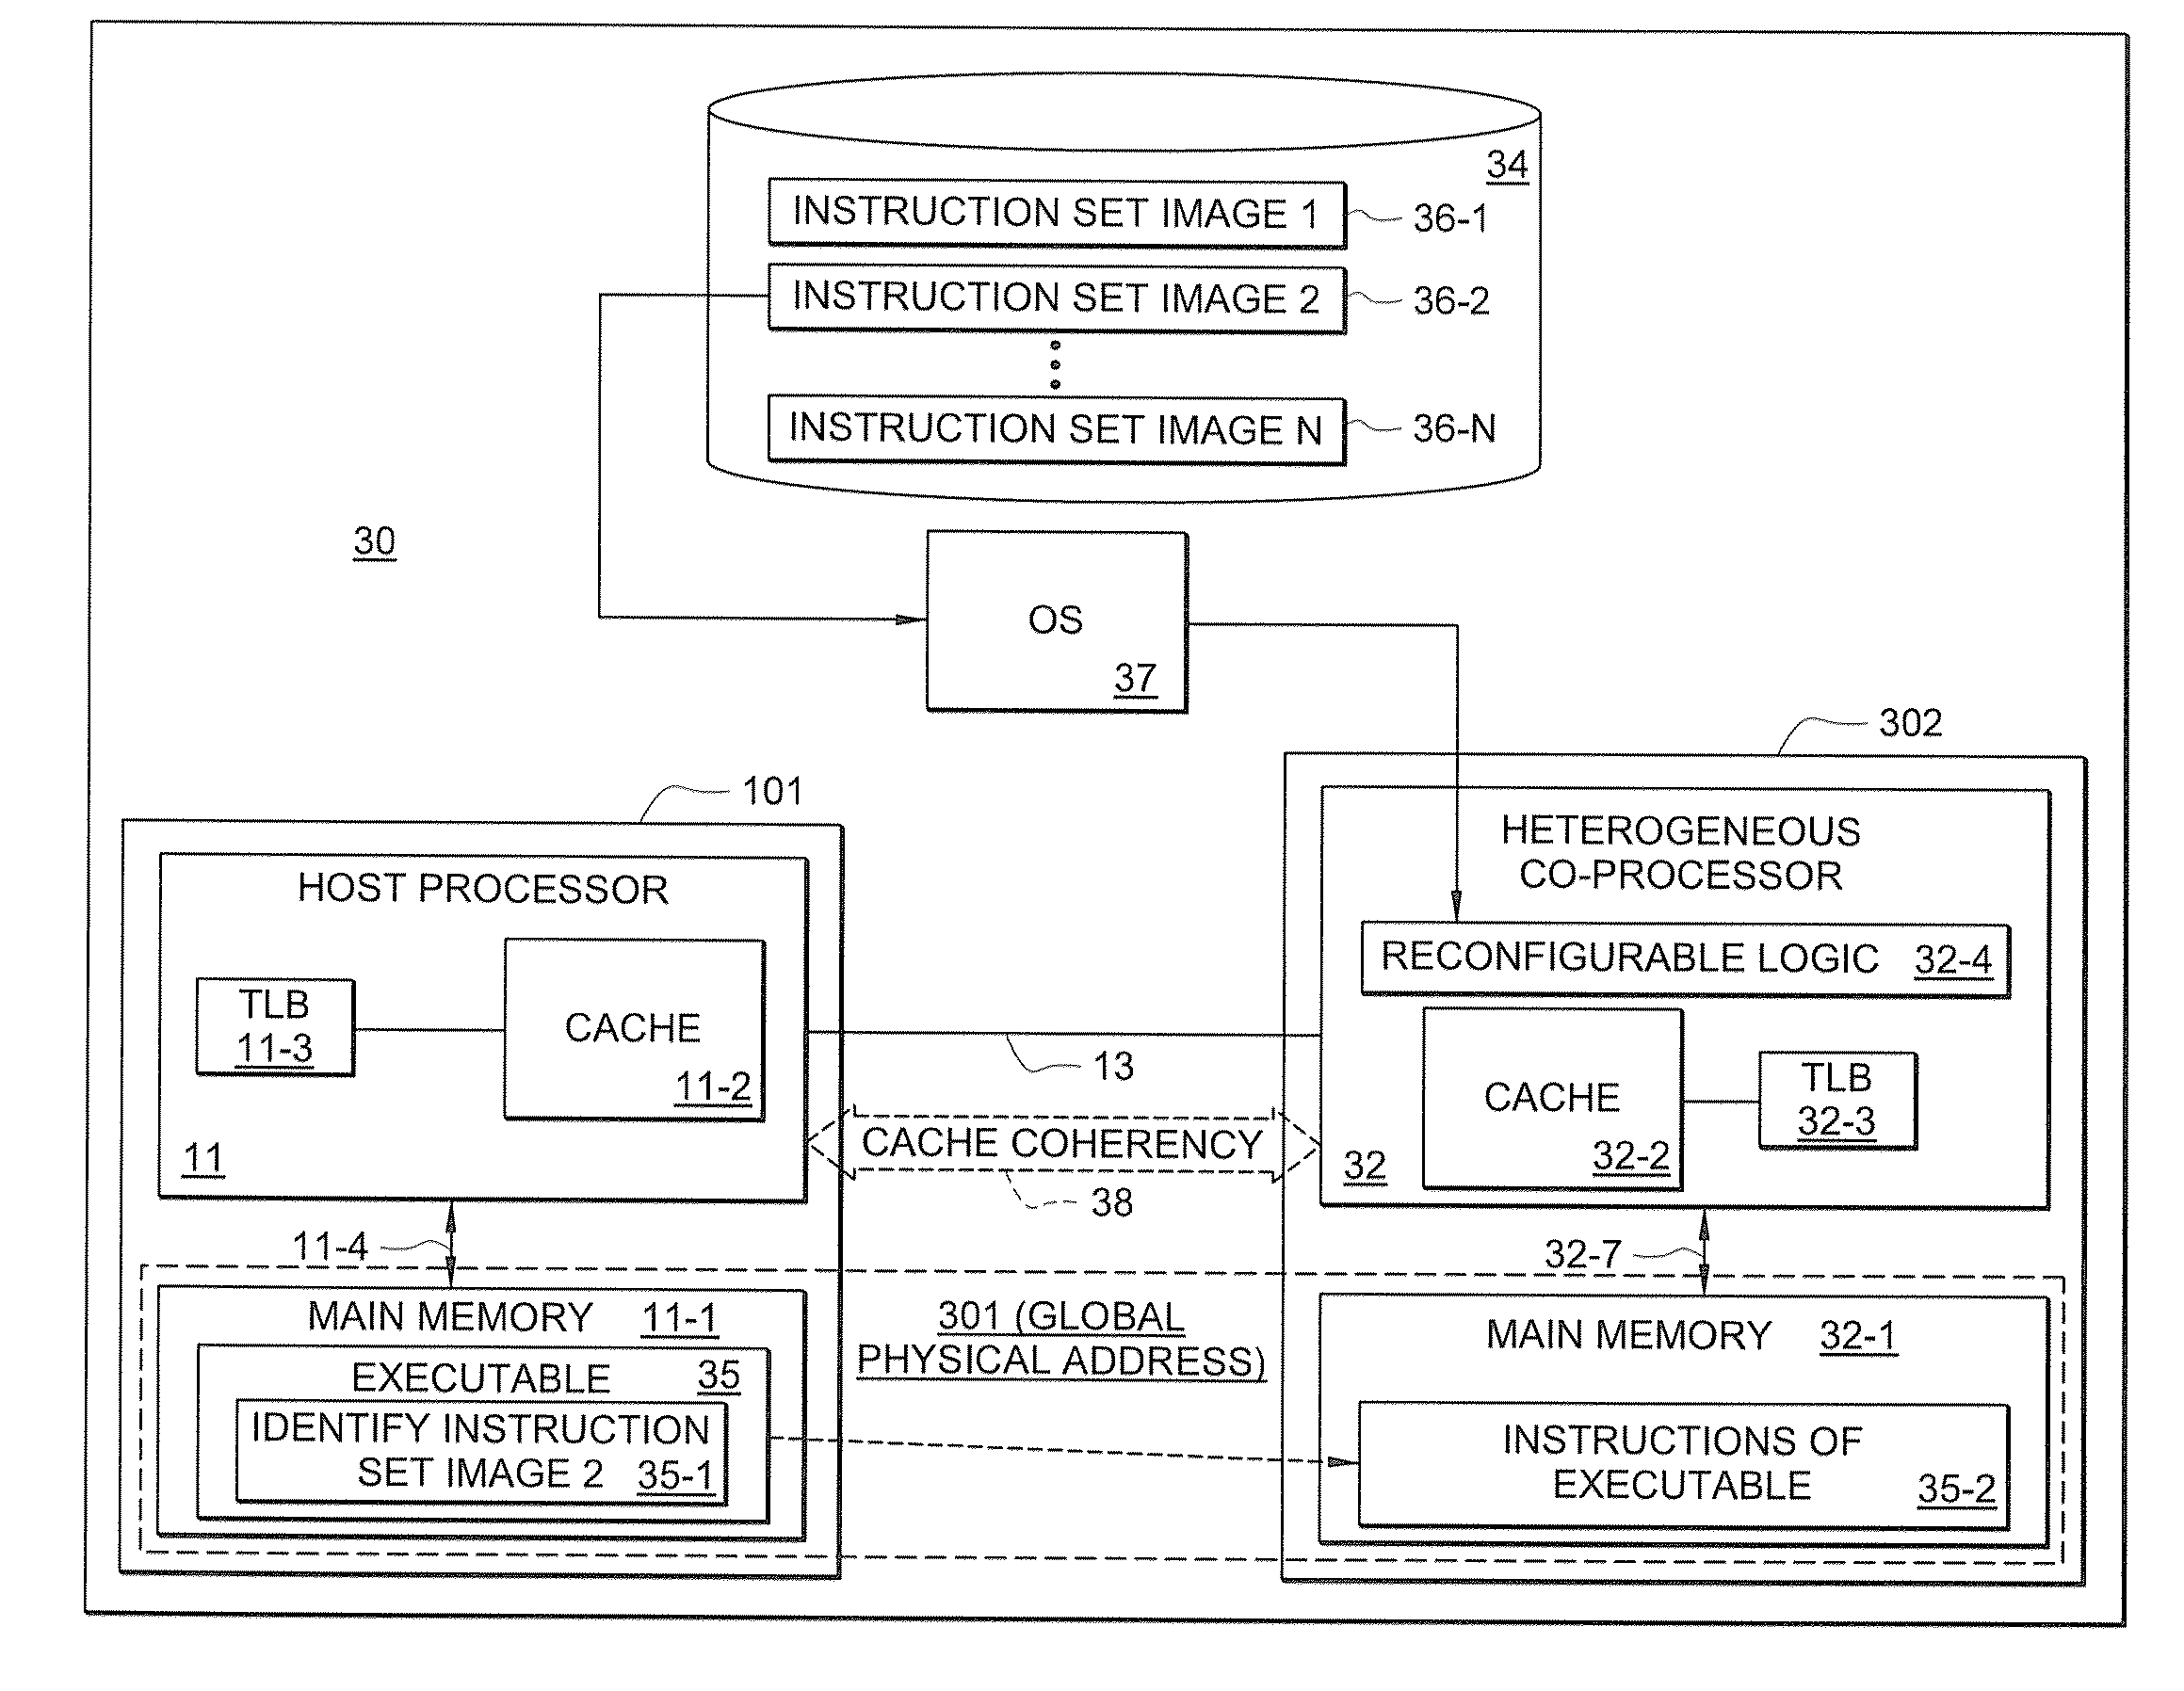 Dispatch mechanism for dispatching insturctions from a host processor to a co-processor